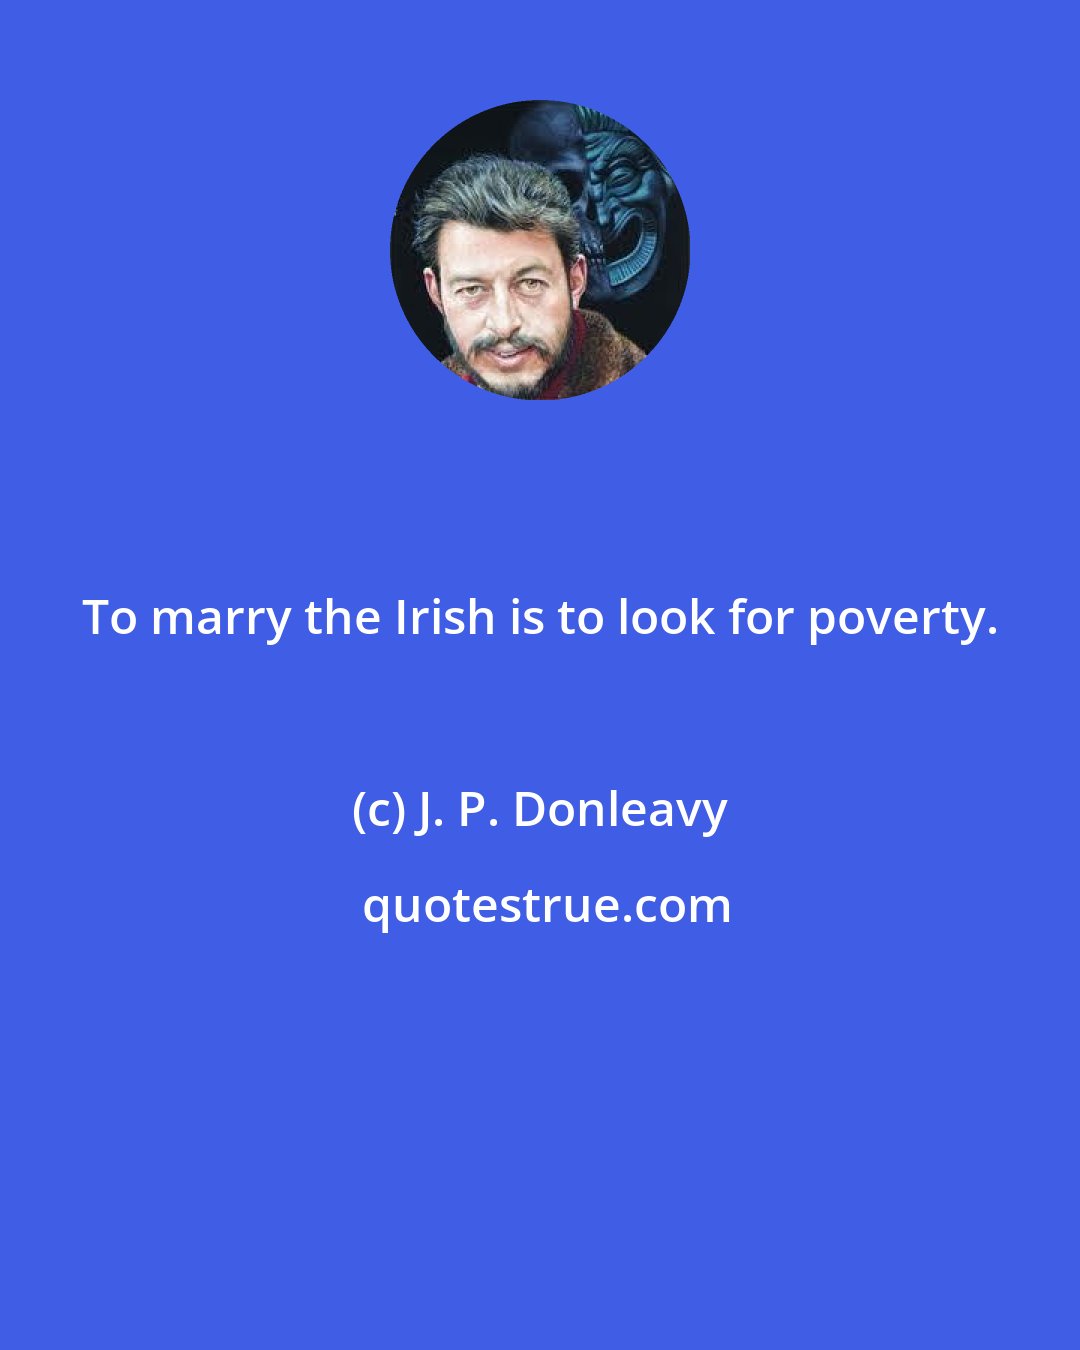 J. P. Donleavy: To marry the Irish is to look for poverty.